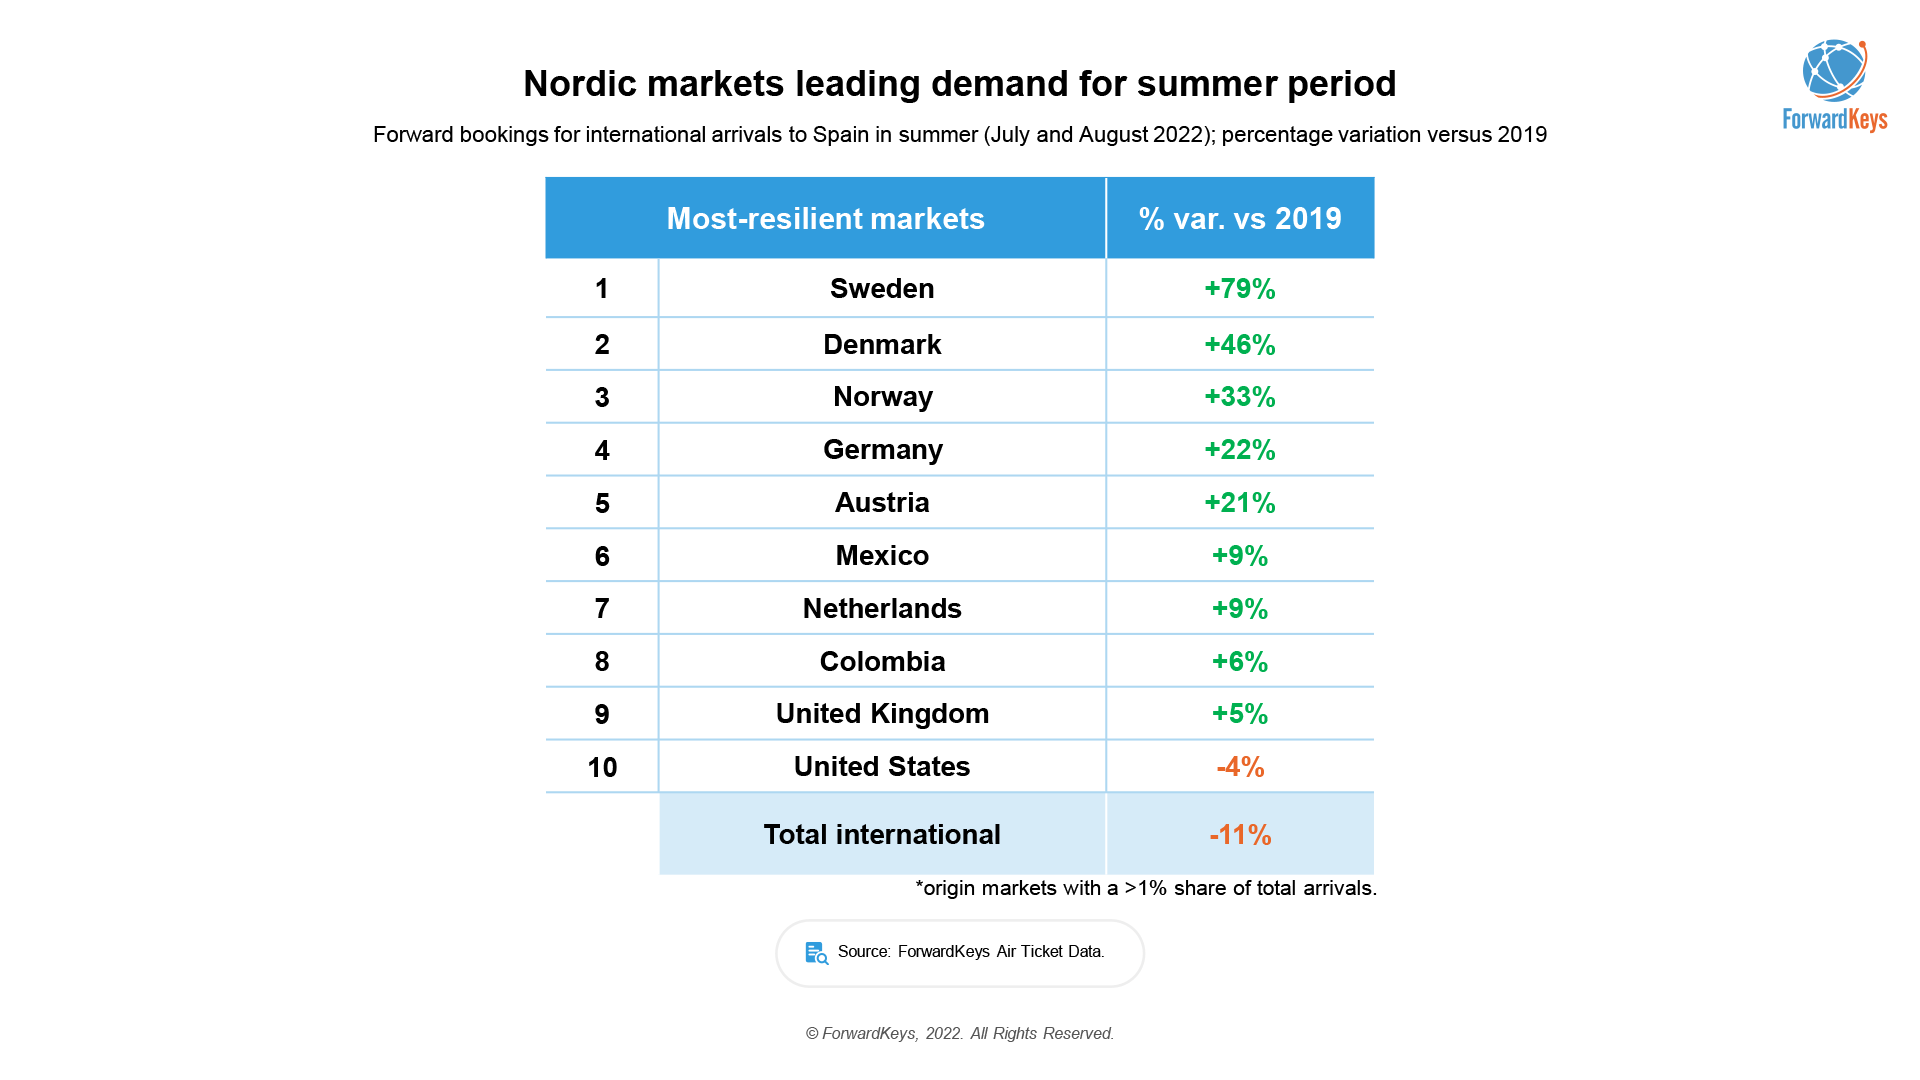 Noric markets lead demand in travel to Spain in the summer period